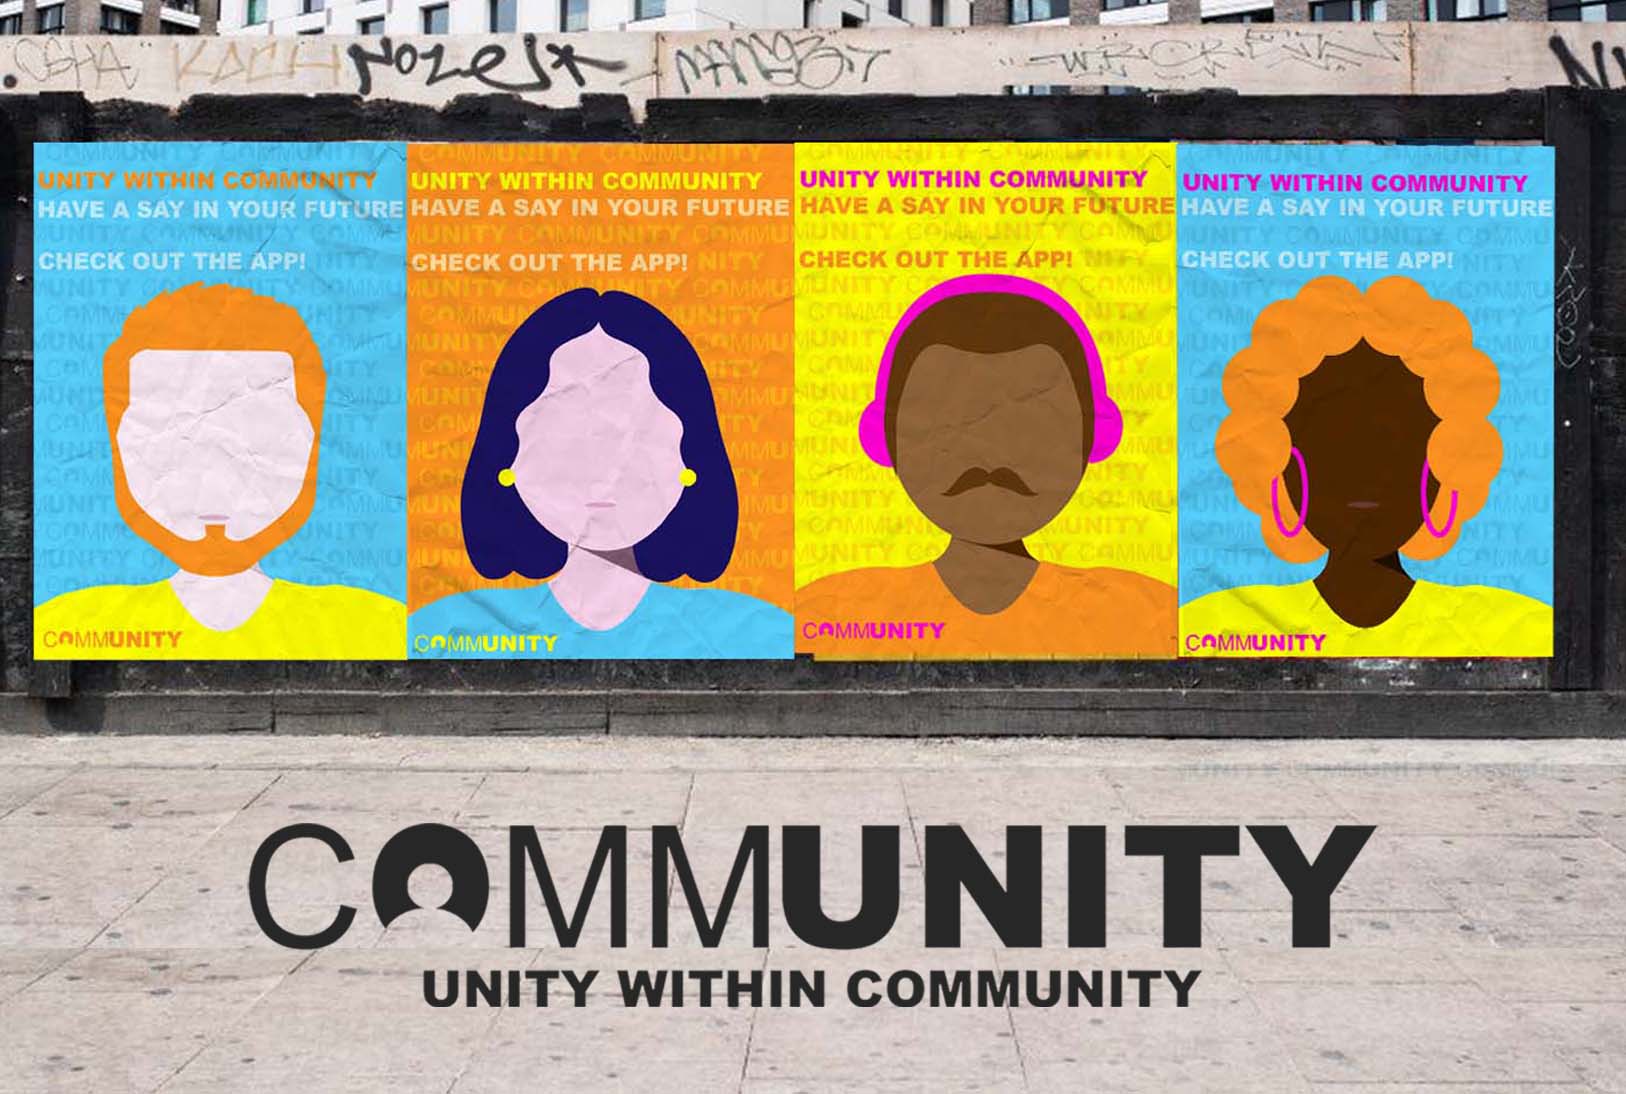 RSA Project - Unity Within Community